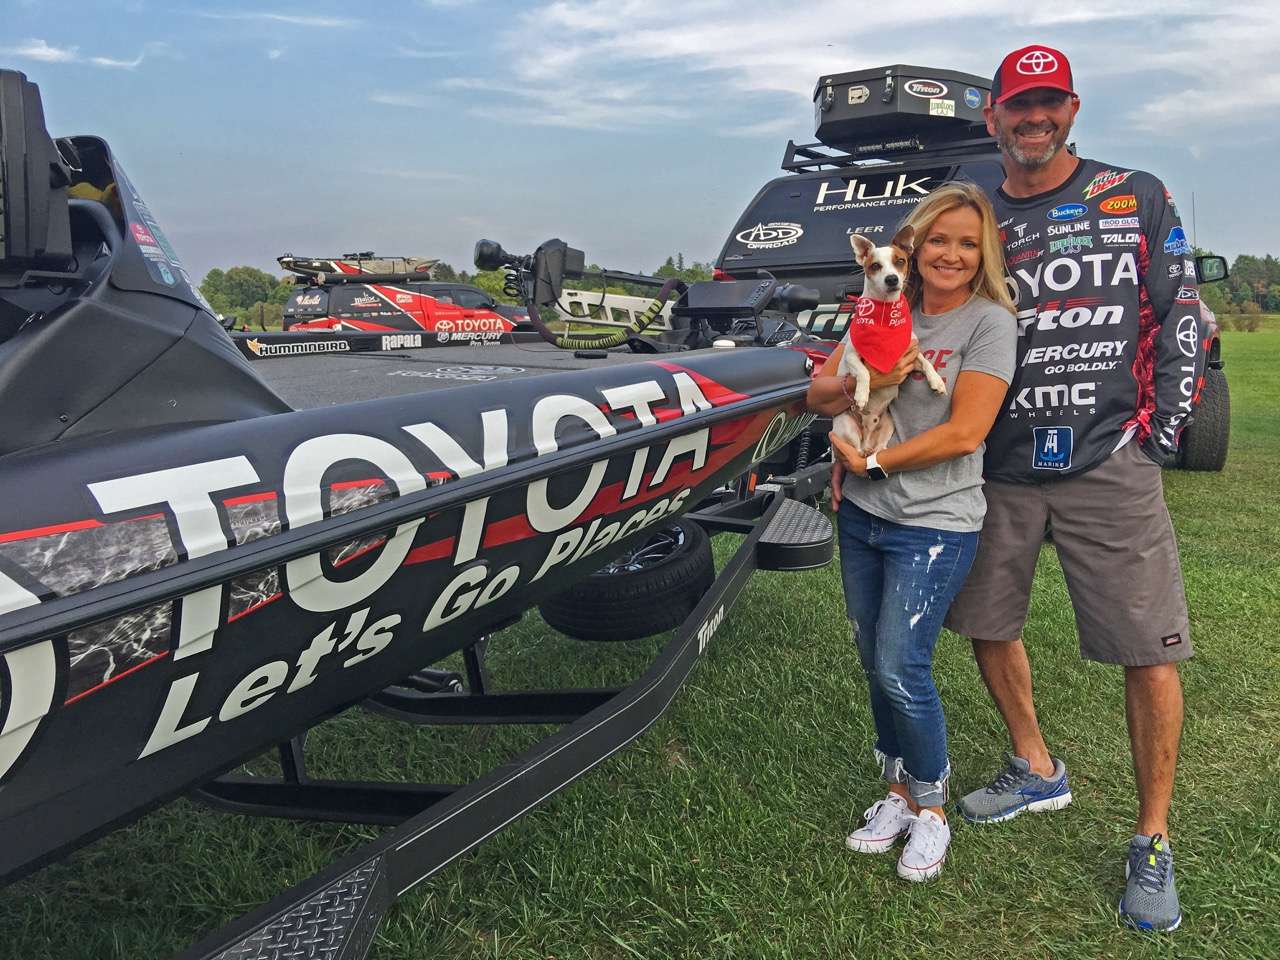 Sunday is National Dog Day and the Bassmaster Elite Series pros love their sweet pups as much as catching St. Lawrence River smallmouth. Please join Gerald Swindle, âLuluâ and their hilarious lil guy âBamaâ along with other Elite Series pros in posting a âDog/Toyota/Fishingâ themed photo to your own social media platforms on Sunday with #ToyotaDog. We'd love to add a few of your photos to Bassmaster.com!